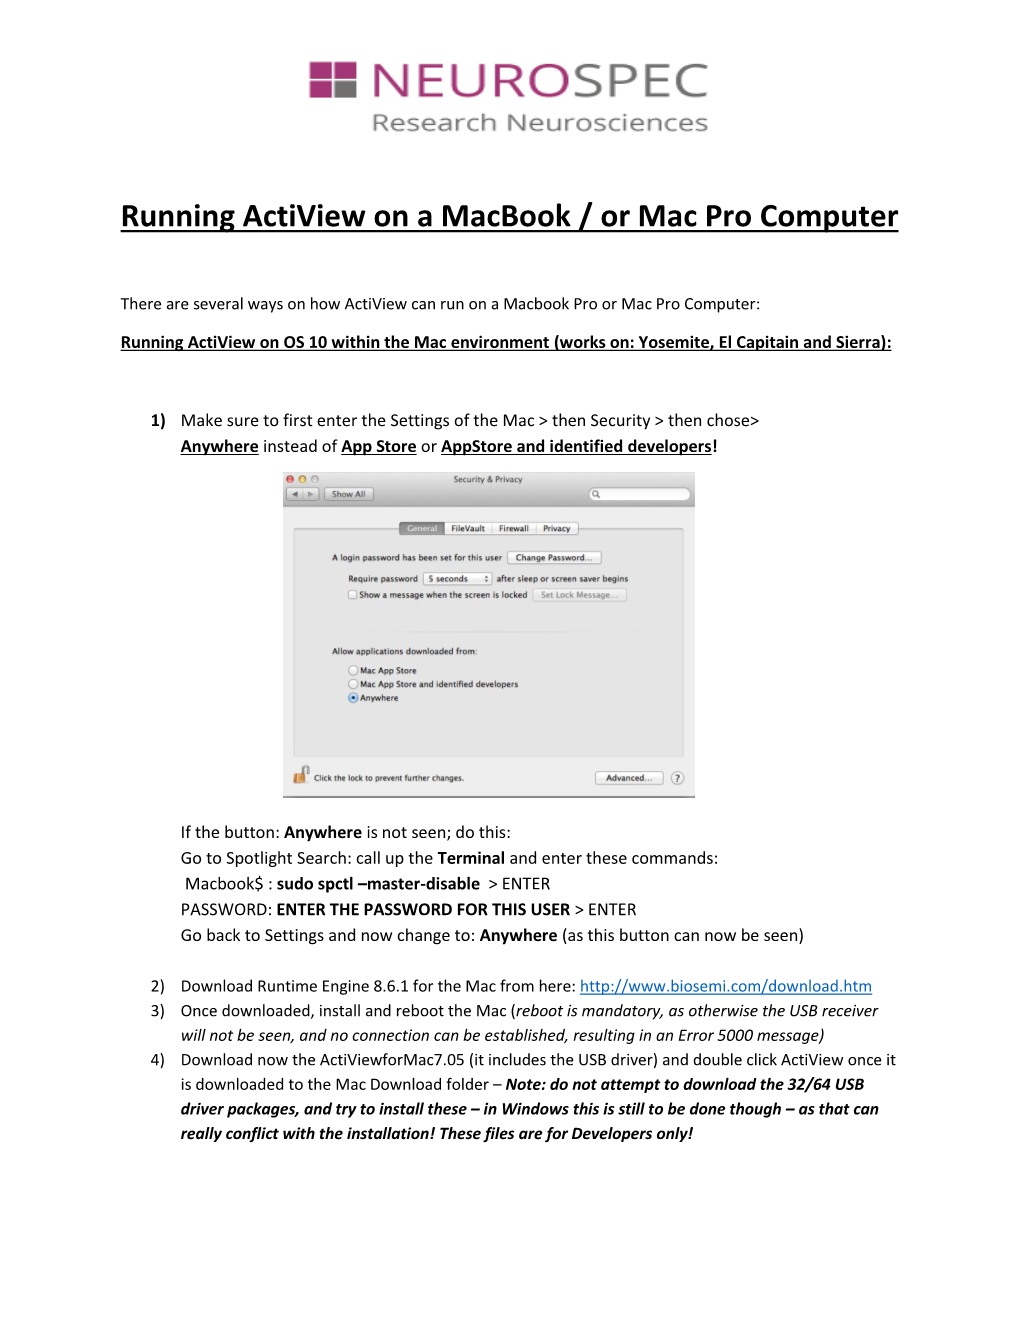 Running Actiview on a Macbook / Or Mac Pro Computer